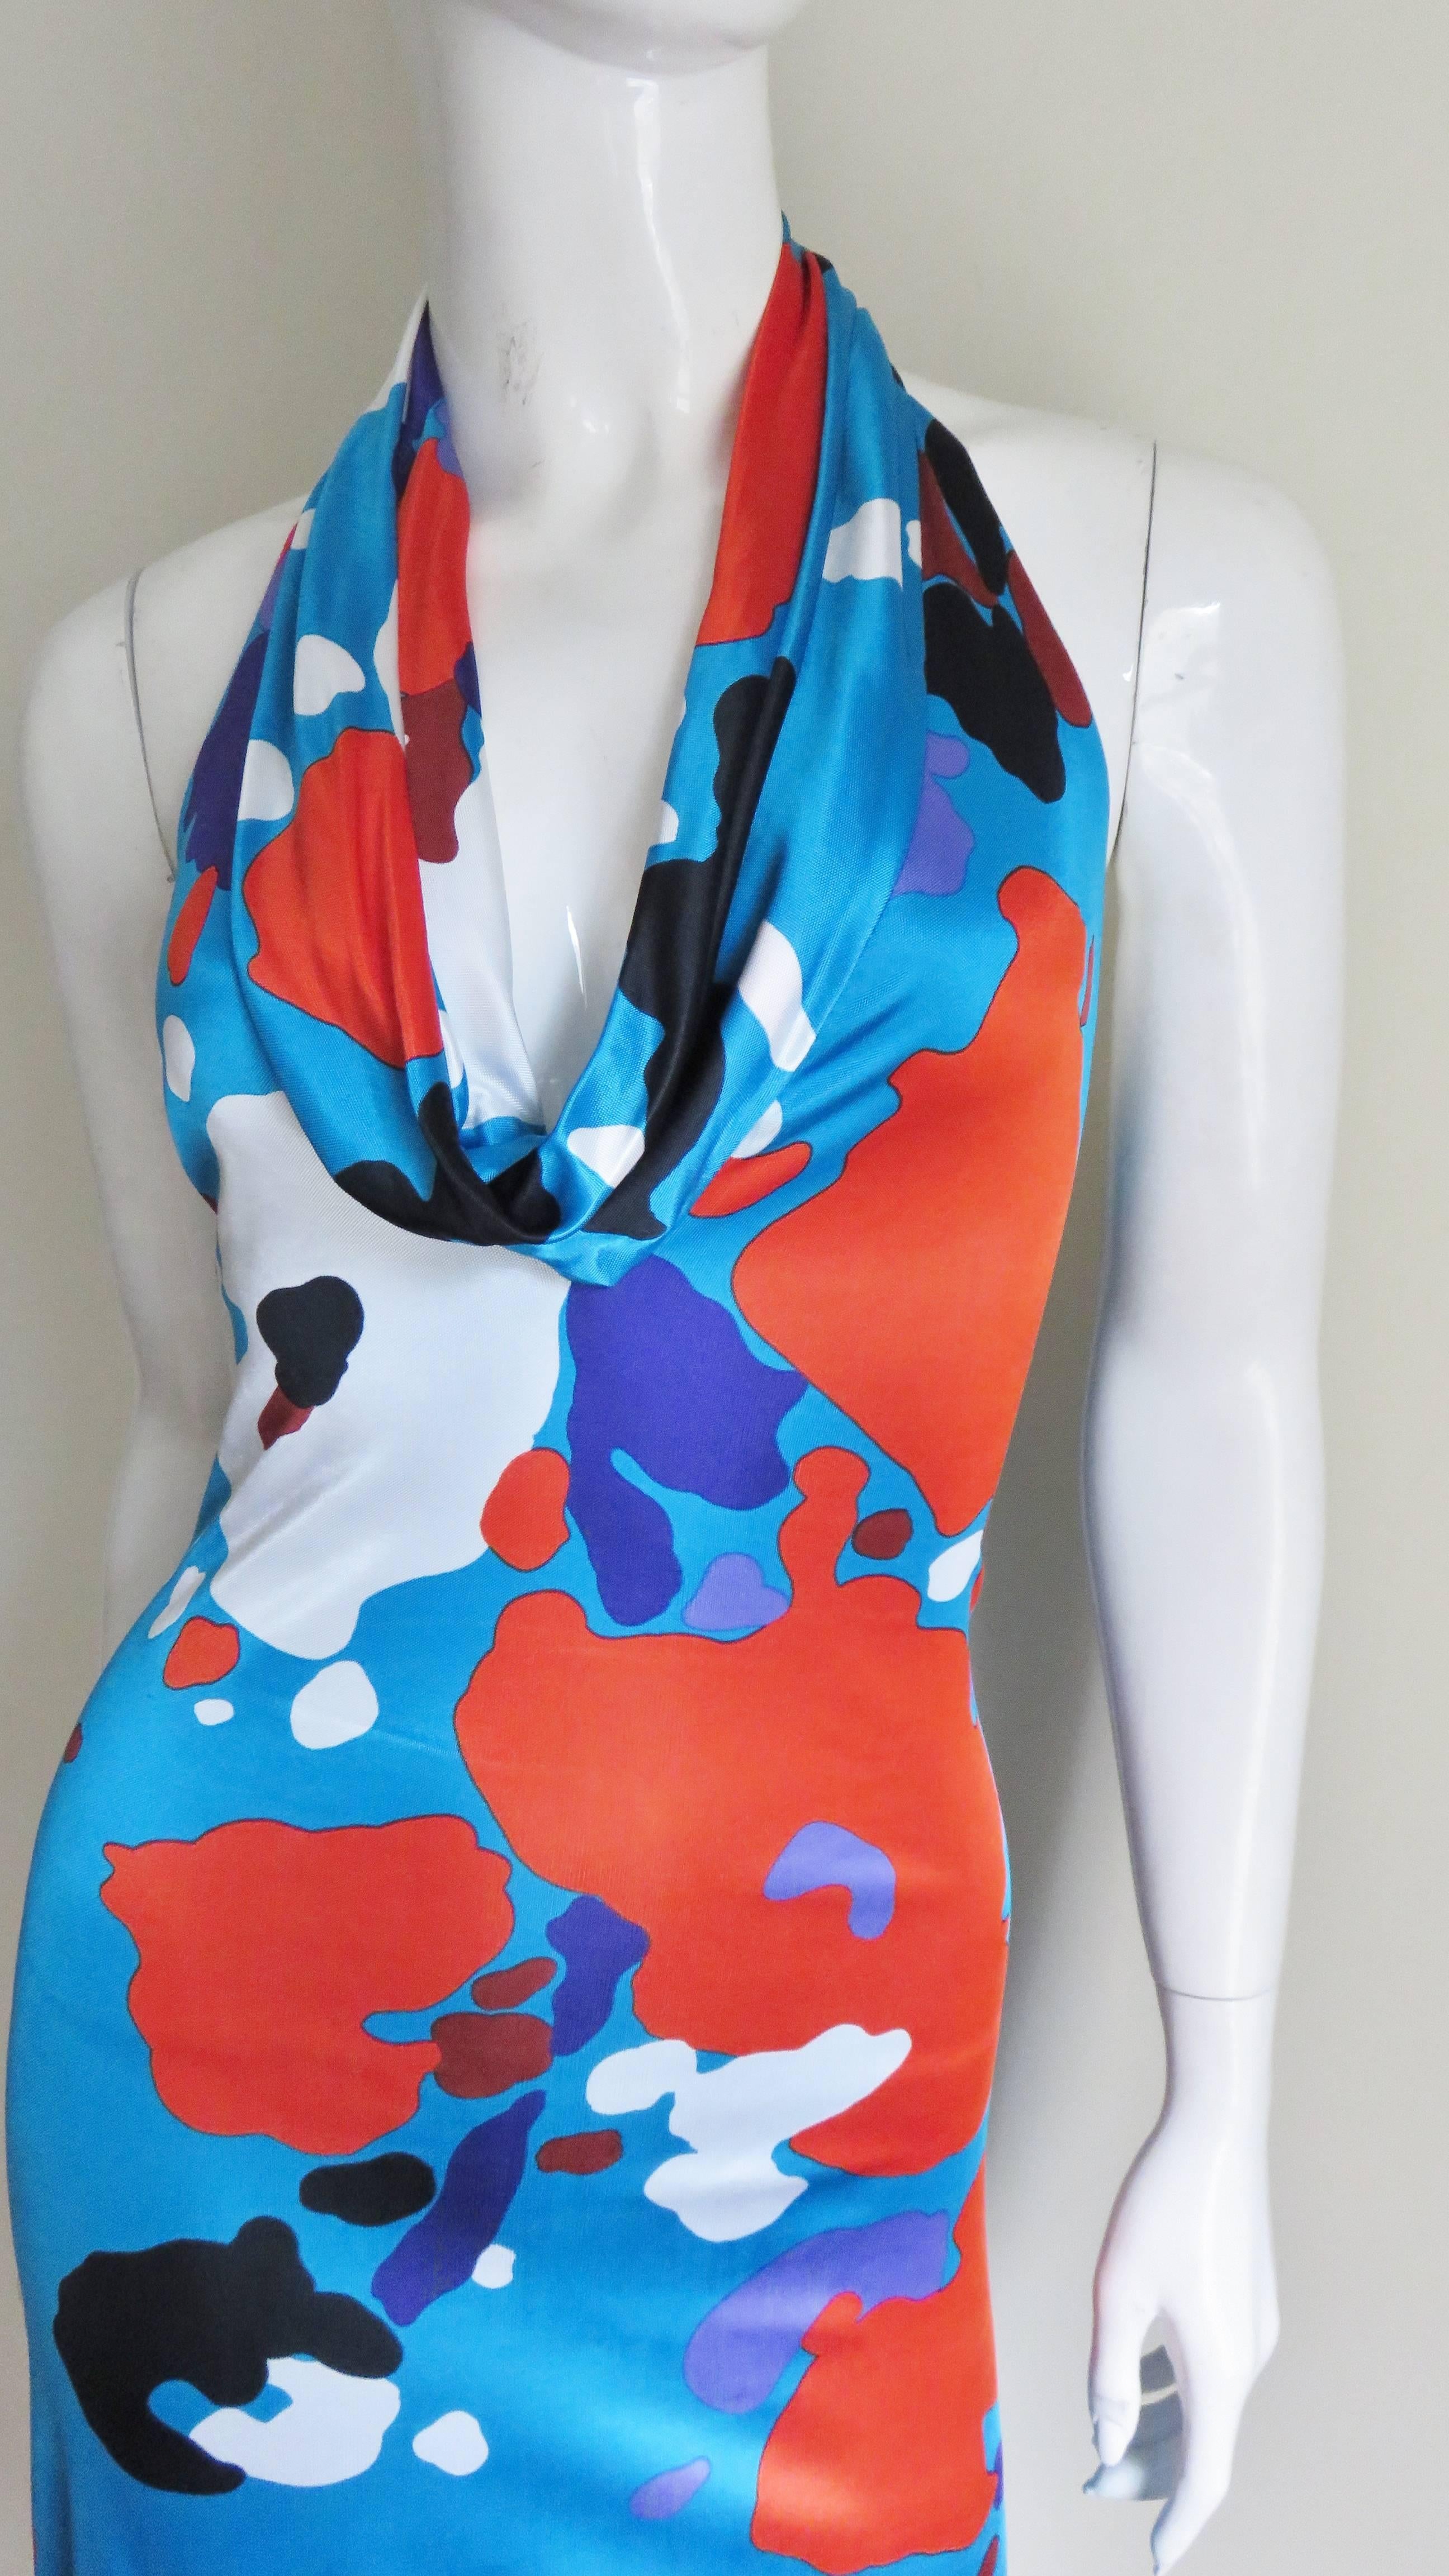 Brightly patterned fine silk knit dress from Gianni Versace Couture. The background color is bright cerulean blue with an abstract pattern of shapes in white, black, blue, red, burgundy and purple. The dress is halter style with the front falling in